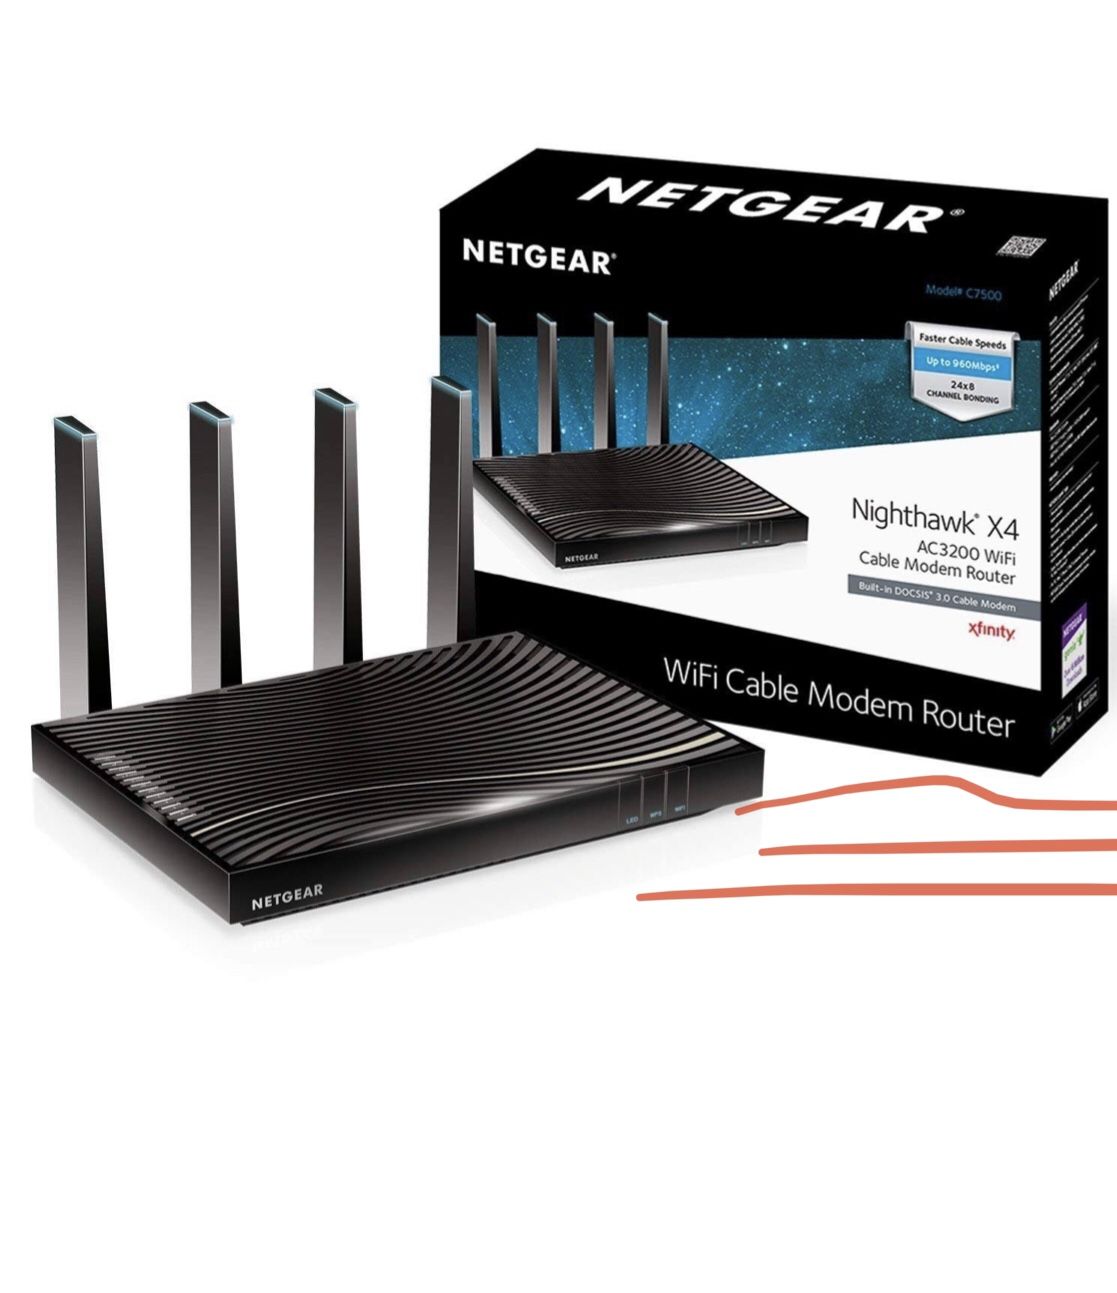 WiFi cable modem router